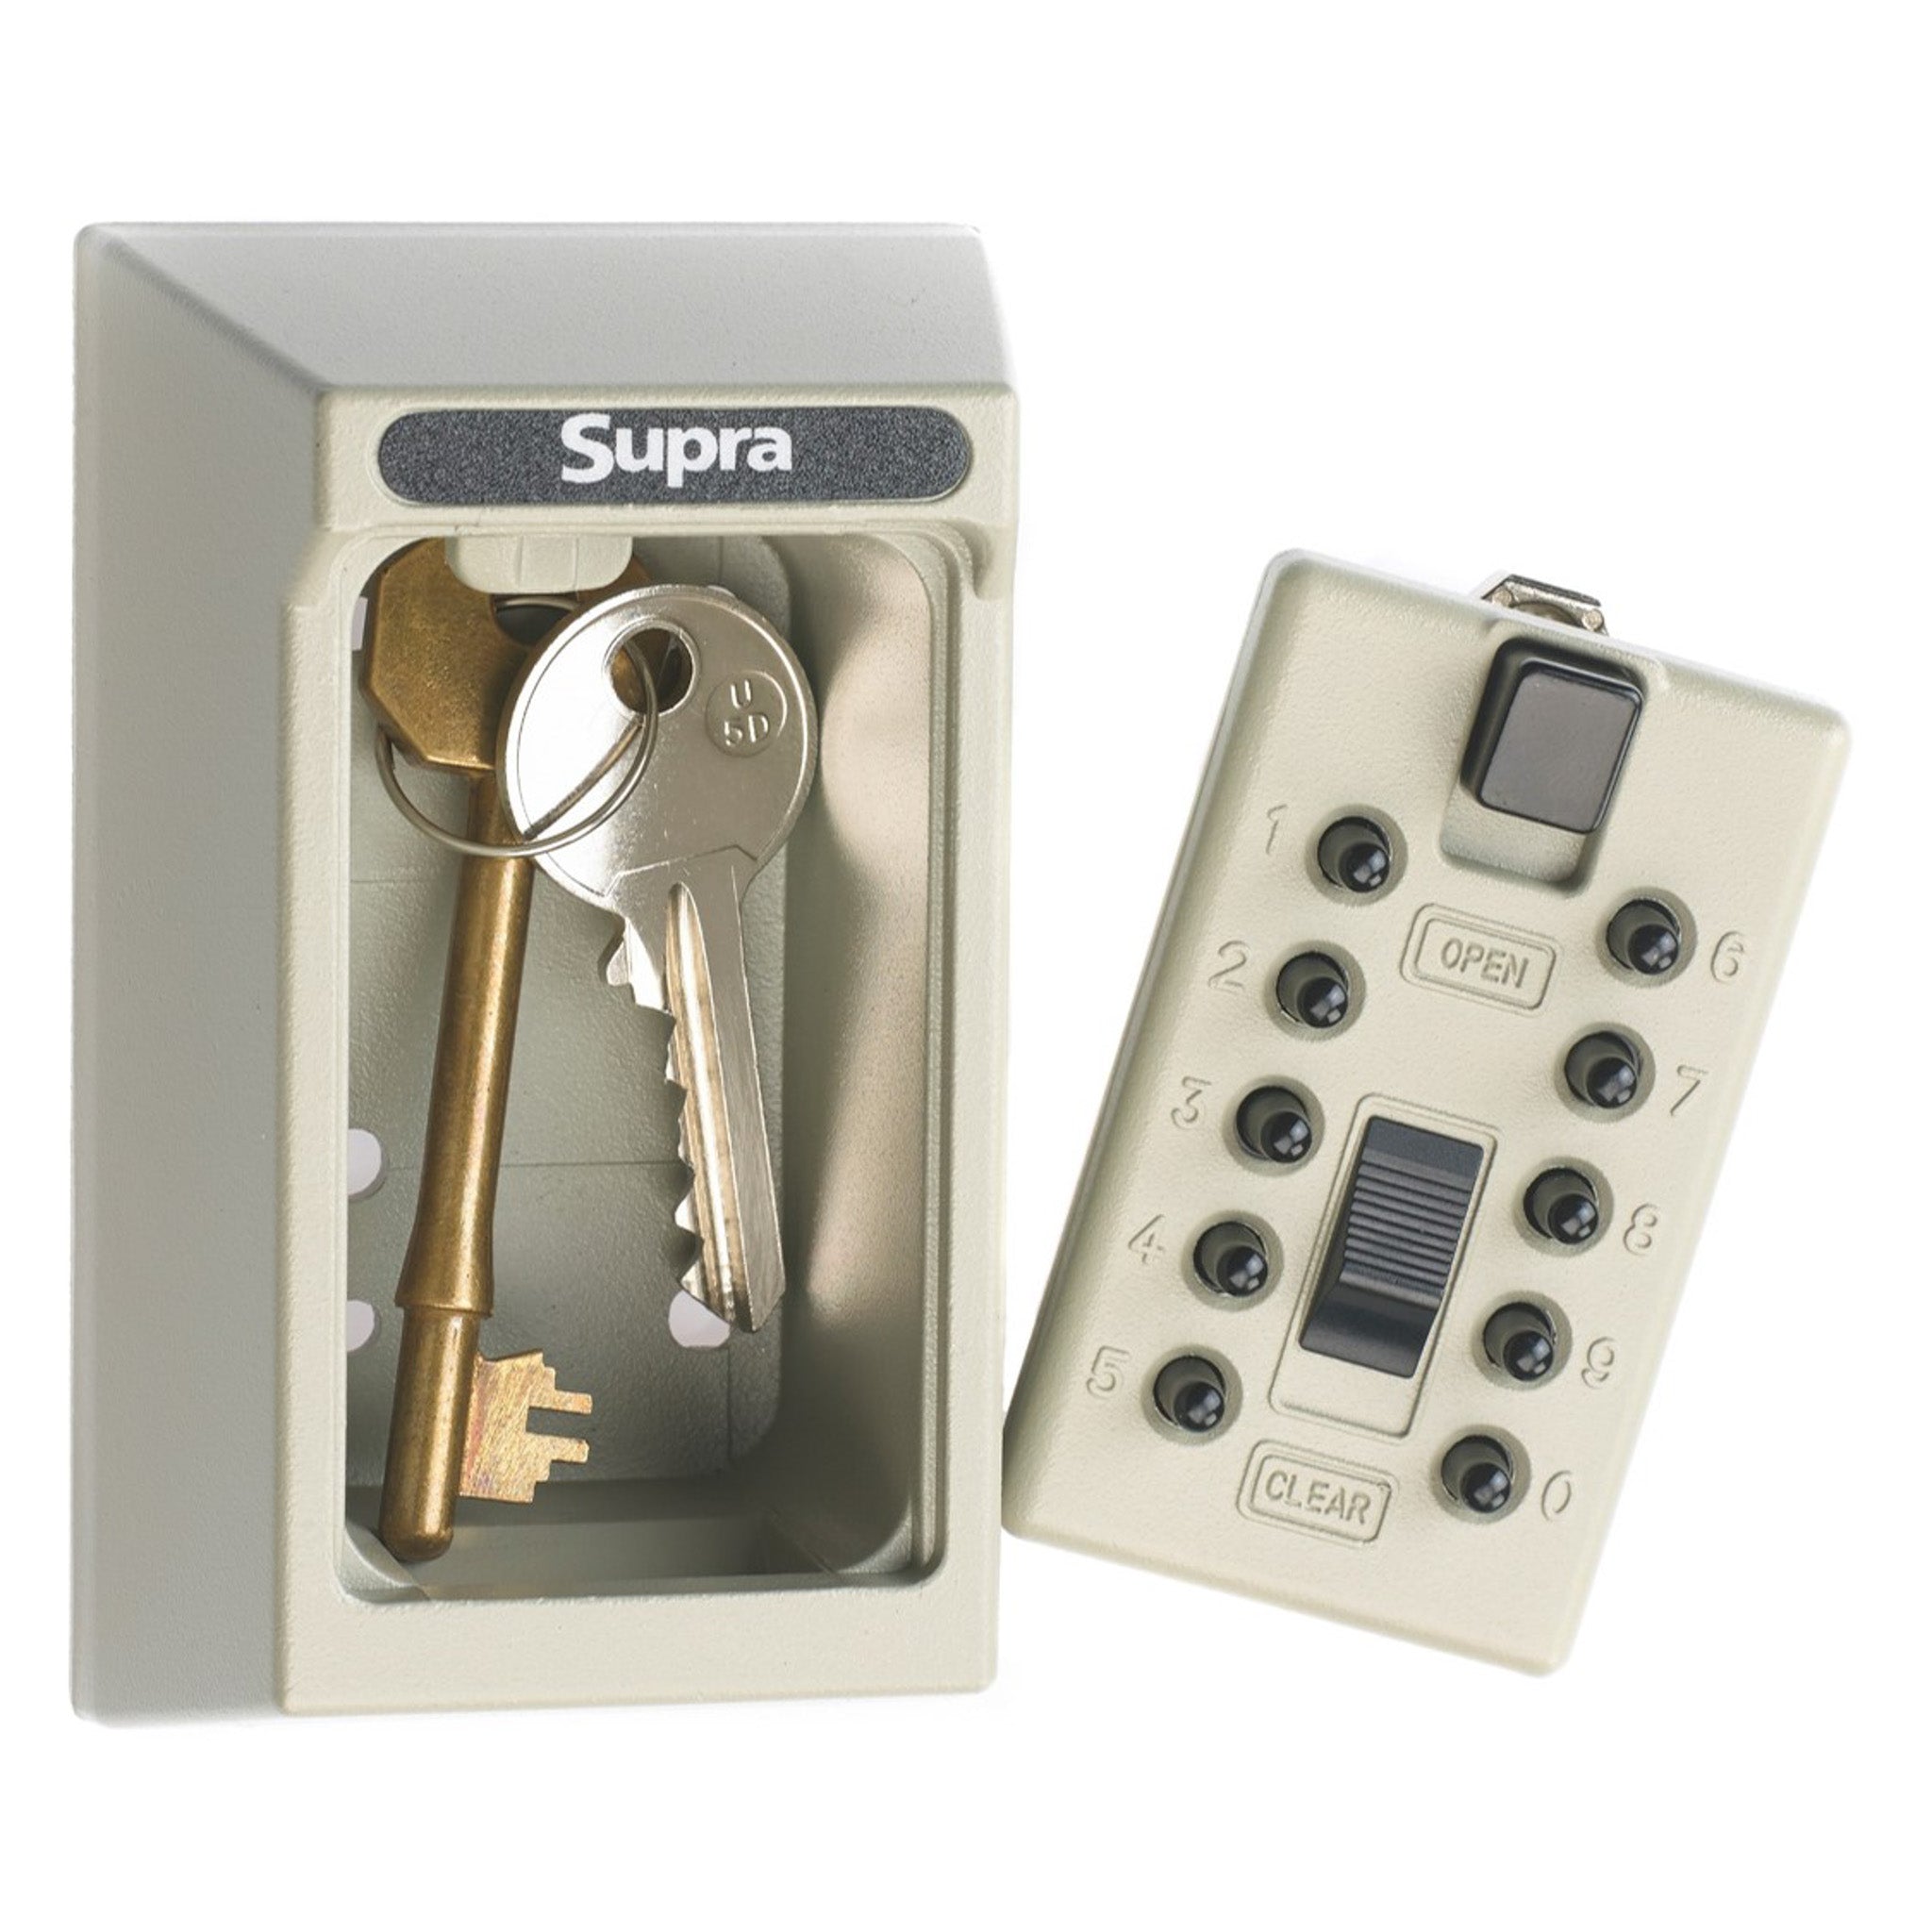 Open Supra S5 permanent key safe with chubb key and yale key inside